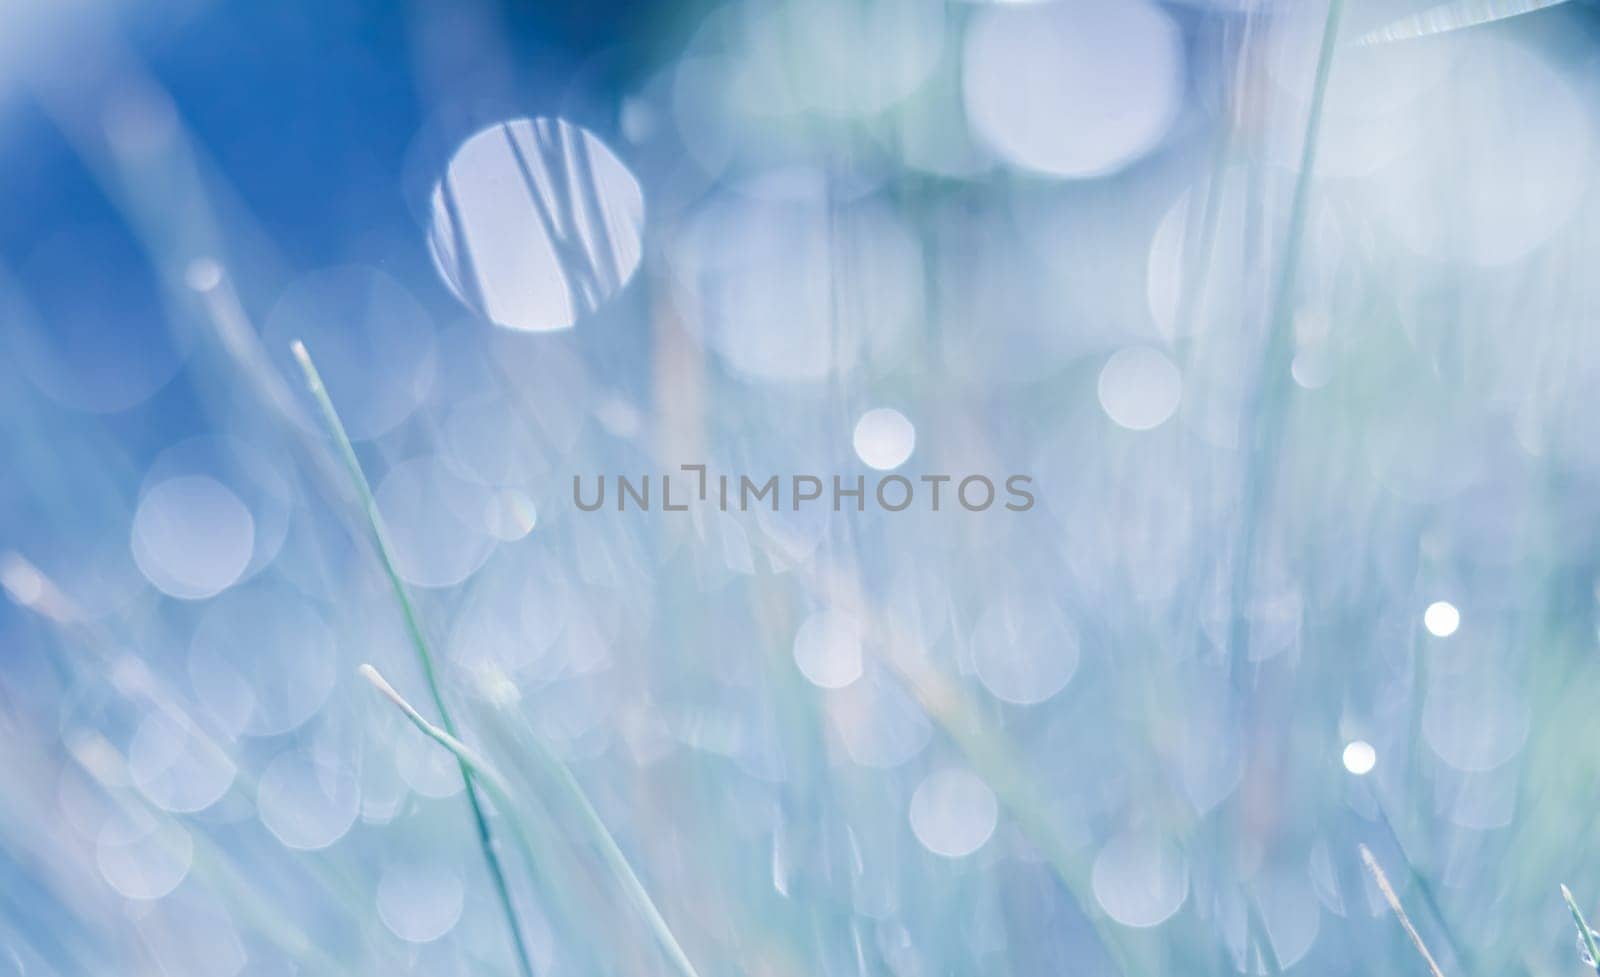 Soft focus ornamental grass with water drop. Blurred blue background